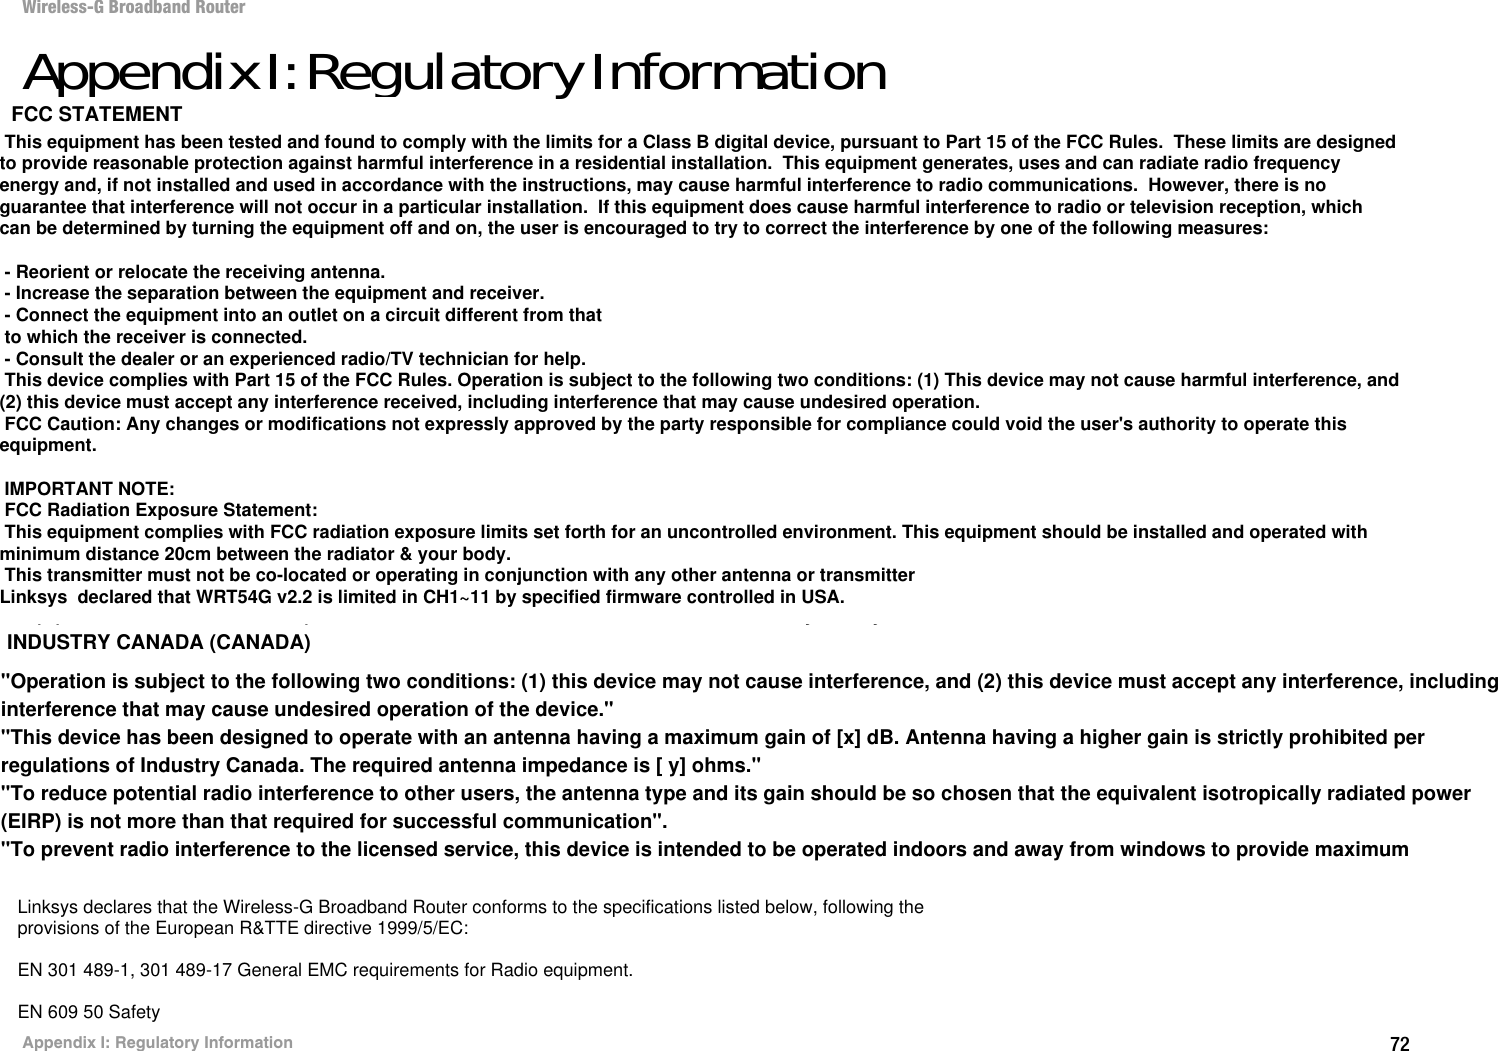 72Appendix I: Regulatory InformationWireless-G Broadband RouterAppendix I: Regulatory InformationFCC STATEMENTThis product has been tested and complies with the specifications for a Class B digital device, pursuant to Part 15 of the FCC Rules. These limits are designed to provide reasonable protection against harmful interference in a residential installation. This equipment generates, uses, and can radiate radio frequency energy and, if not installed and used according to the instructions, may cause harmful interference to radio communications. However, there is no guarantee that interference will not occur in a particular installation. If this equipment does cause harmful interference to radio or television reception, which is found by turning the equipment off and on, the user is encouraged to try to correct the interference by one or more of the following measures:Reorient or relocate the receiving antennaIncrease the separation between the equipment or devicesConnect the equipment to an outlet other than the receiver&apos;sConsult a dealer or an experienced radio/TV technician for assistanceFCC Radiation Exposure StatementThis equipment complies with FCC radiation exposure limits set forth for an uncontrolled environment.  This equipment should be installed and operated with minimum distance 20cm between the radiator and your body.INDUSTRY CANADA (CANADA)This Class B digital apparatus complies with Canadian ICES-003.Cet appareil numérique de la classe B est conforme à la norme NMB-003 du Canada.The use of this device in a system operating either partially or completely outdoors may require the user to obtain a license for the system according to the Canadian regulations.EC DECLARATION OF CONFORMITY (EUROPE)Linksys declares that the Wireless-G Broadband Router conforms to the specifications listed below, following the provisions of the European R&amp;TTE directive 1999/5/EC: EN 301 489-1, 301 489-17 General EMC requirements for Radio equipment.EN 609 50 SafetyEC DECLARATION OF CONFORMITY (EUROPE)Linksys declares that the Wireless-G Broadband Router conforms to the specifications listed below, following theprovisions of the European R&amp;TTE directive 1999/5/EC:EN 301 489-1, 301 489-17 General EMC requirements for Radio equipment.EN 609 50 SafetyTo prevent radio interference to the licenced service, this device is intended to be operated indoors and away from windows to provide maximum shielding. Equipment (or its transmit antenna) that is installed outdoors is subject to licensing This equipment has been tested and found to comply with the limits for a Class B digital device, pursuant to Part 15 of the FCC Rules.  These limits are designed to provide reasonable protection against harmful interference in a residential installation.  This equipment generates, uses and can radiate radio frequency energy and, if not installed and used in accordance with the instructions, may cause harmful interference to radio communications.  However, there is no guarantee that interference will not occur in a particular installation.  If this equipment does cause harmful interference to radio or television reception, which can be determined by turning the equipment off and on, the user is encouraged to try to correct the interference by one of the following measures: - Reorient or relocate the receiving antenna. - Increase the separation between the equipment and receiver. - Connect the equipment into an outlet on a circuit different from that to which the receiver is connected. - Consult the dealer or an experienced radio/TV technician for help. This device complies with Part 15 of the FCC Rules. Operation is subject to the following two conditions: (1) This device may not cause harmful interference, and (2) this device must accept any interference received, including interference that may cause undesired operation. FCC Caution: Any changes or modifications not expressly approved by the party responsible for compliance could void the user&apos;s authority to operate this equipment. IMPORTANT NOTE: FCC Radiation Exposure Statement: This equipment complies with FCC radiation exposure limits set forth for an uncontrolled environment. This equipment should be installed and operated with minimum distance 20cm between the radiator &amp; your body. This transmitter must not be co-located or operating in conjunction with any other antenna or transmitterLinksys  declared that WRT54G v2.2 is limited in CH1~11 by specified firmware controlled in USA.INDUSTRY CANADA (CANADA)FCC STATEMENT&quot;Operation is subject to the following two conditions: (1) this device may not cause interference, and (2) this device must accept any interference, including interference that may cause undesired operation of the device.&quot;&quot;This device has been designed to operate with an antenna having a maximum gain of [x] dB. Antenna having a higher gain is strictly prohibited per regulations of Industry Canada. The required antenna impedance is [ y] ohms.&quot; &quot;To reduce potential radio interference to other users, the antenna type and its gain should be so chosen that the equivalent isotropically radiated power (EIRP) is not more than that required for successful communication&quot;.&quot;To prevent radio interference to the licensed service, this device is intended to be operated indoors and away from windows to provide maximum 